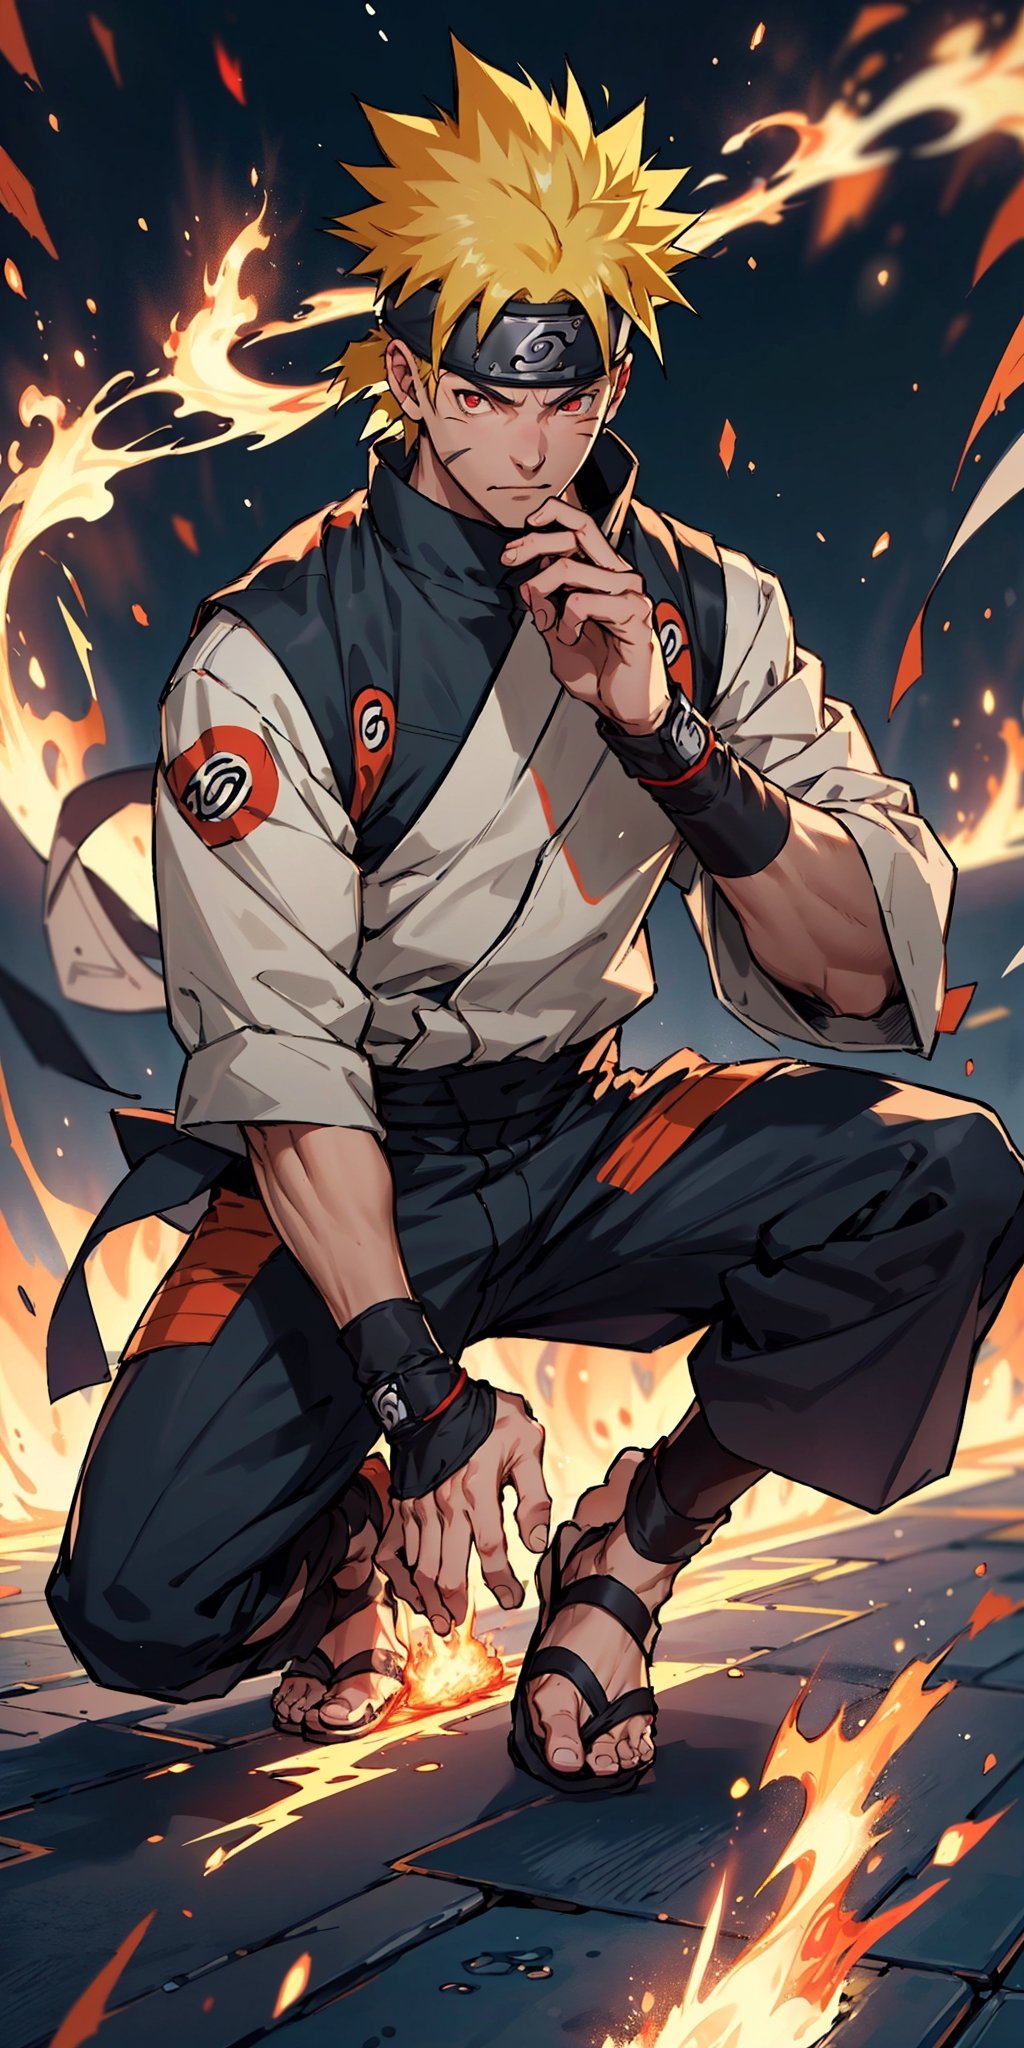 Imagine a breathtaking image featuring Naruto Uzumaki in his iconic outfit with yellow hair, red eyes, and a ninja headband. Visualize him using fireball magic against a meticulously detailed background. Request a 32k HD high-quality image that captures every intricate detail, ensuring perfection in his face, eyes, hands, fingers, legs, footwear, and outfit. Aim for a visual masterpiece that showcases the essence of Naruto in an extraordinary and highly detailed composition.,n4rut0,Estelle_Bright_Kiseki,perfect,Naruto uzumaki ,facial mark